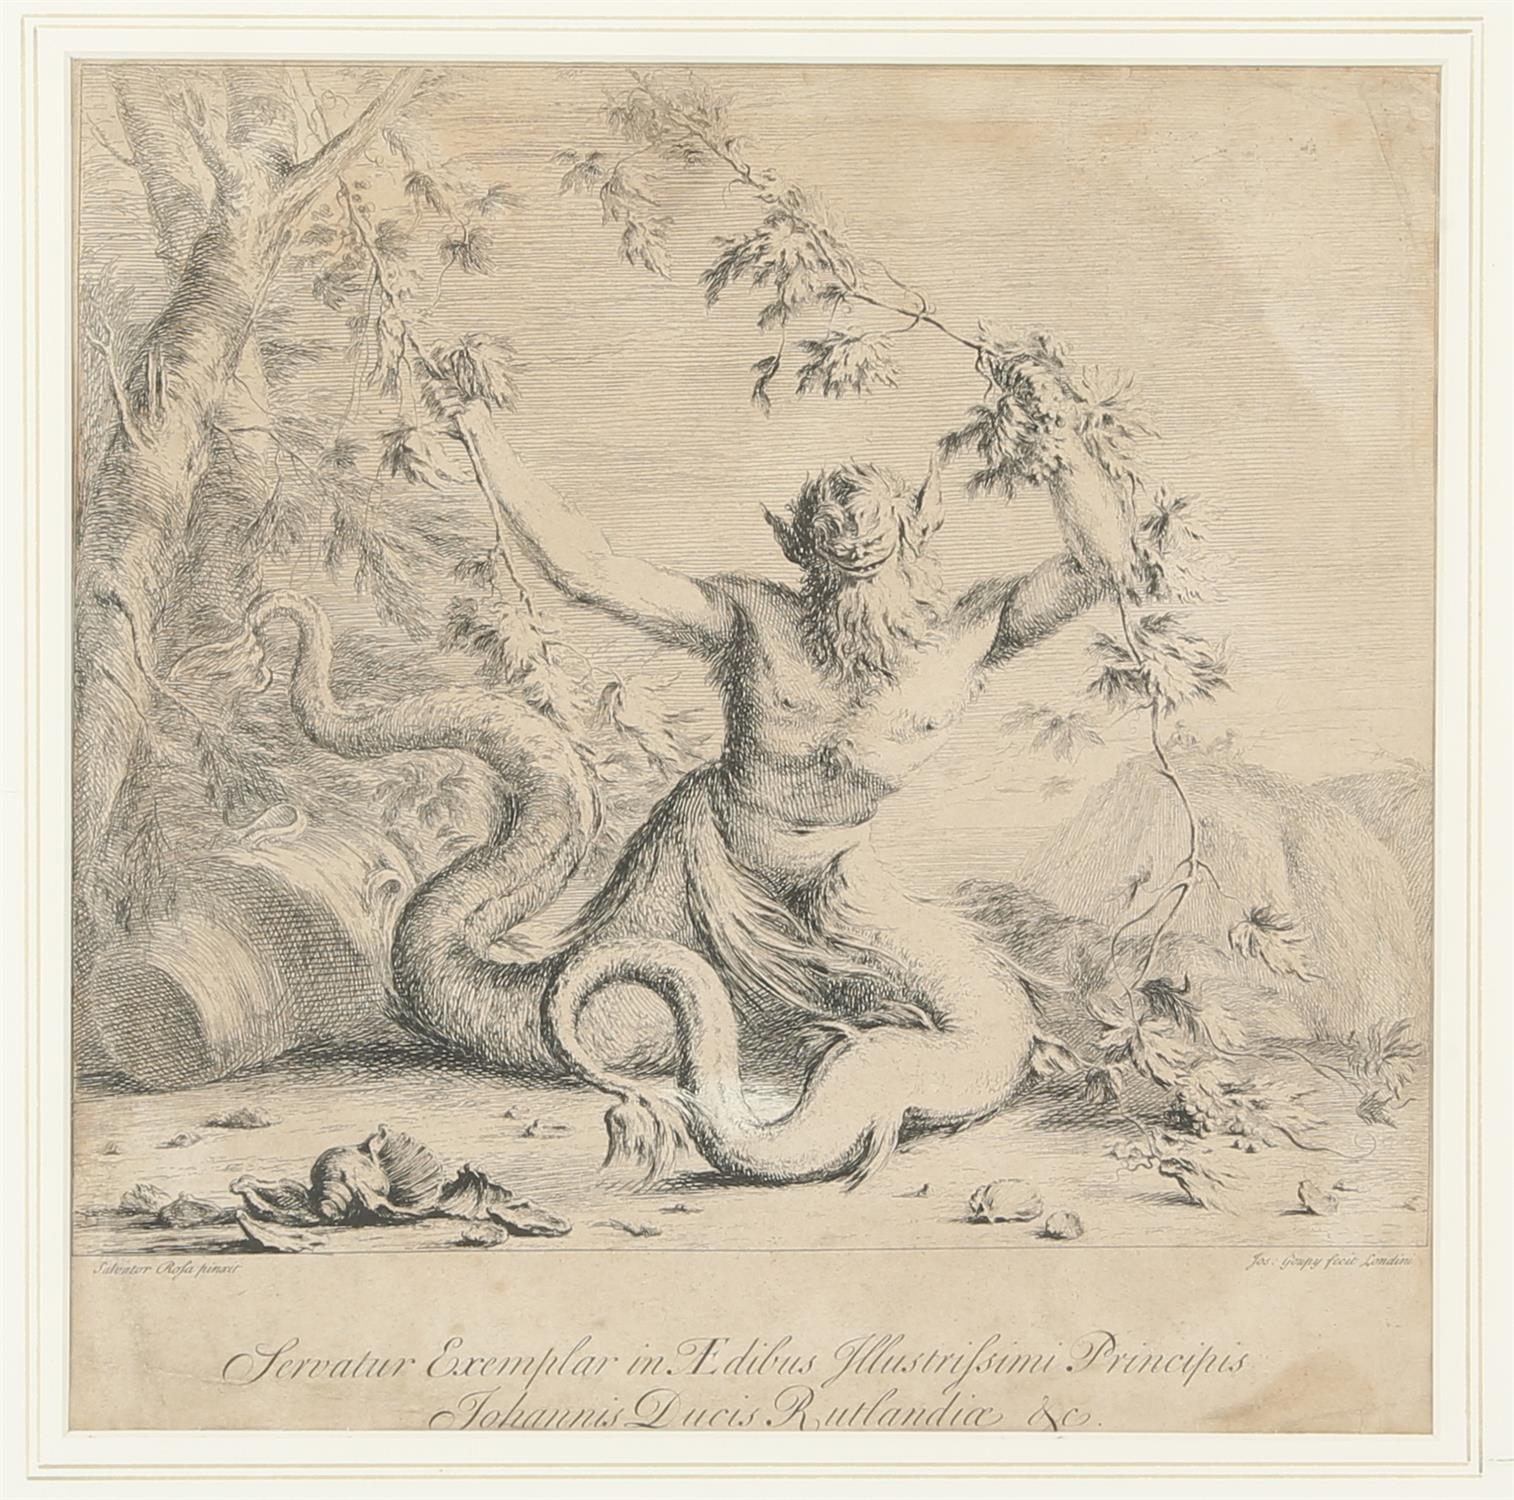 Joseph Goupy ‘Servator Exemplar in Edibus etc…’ Portrait of a Sea Monster with two tails pulling